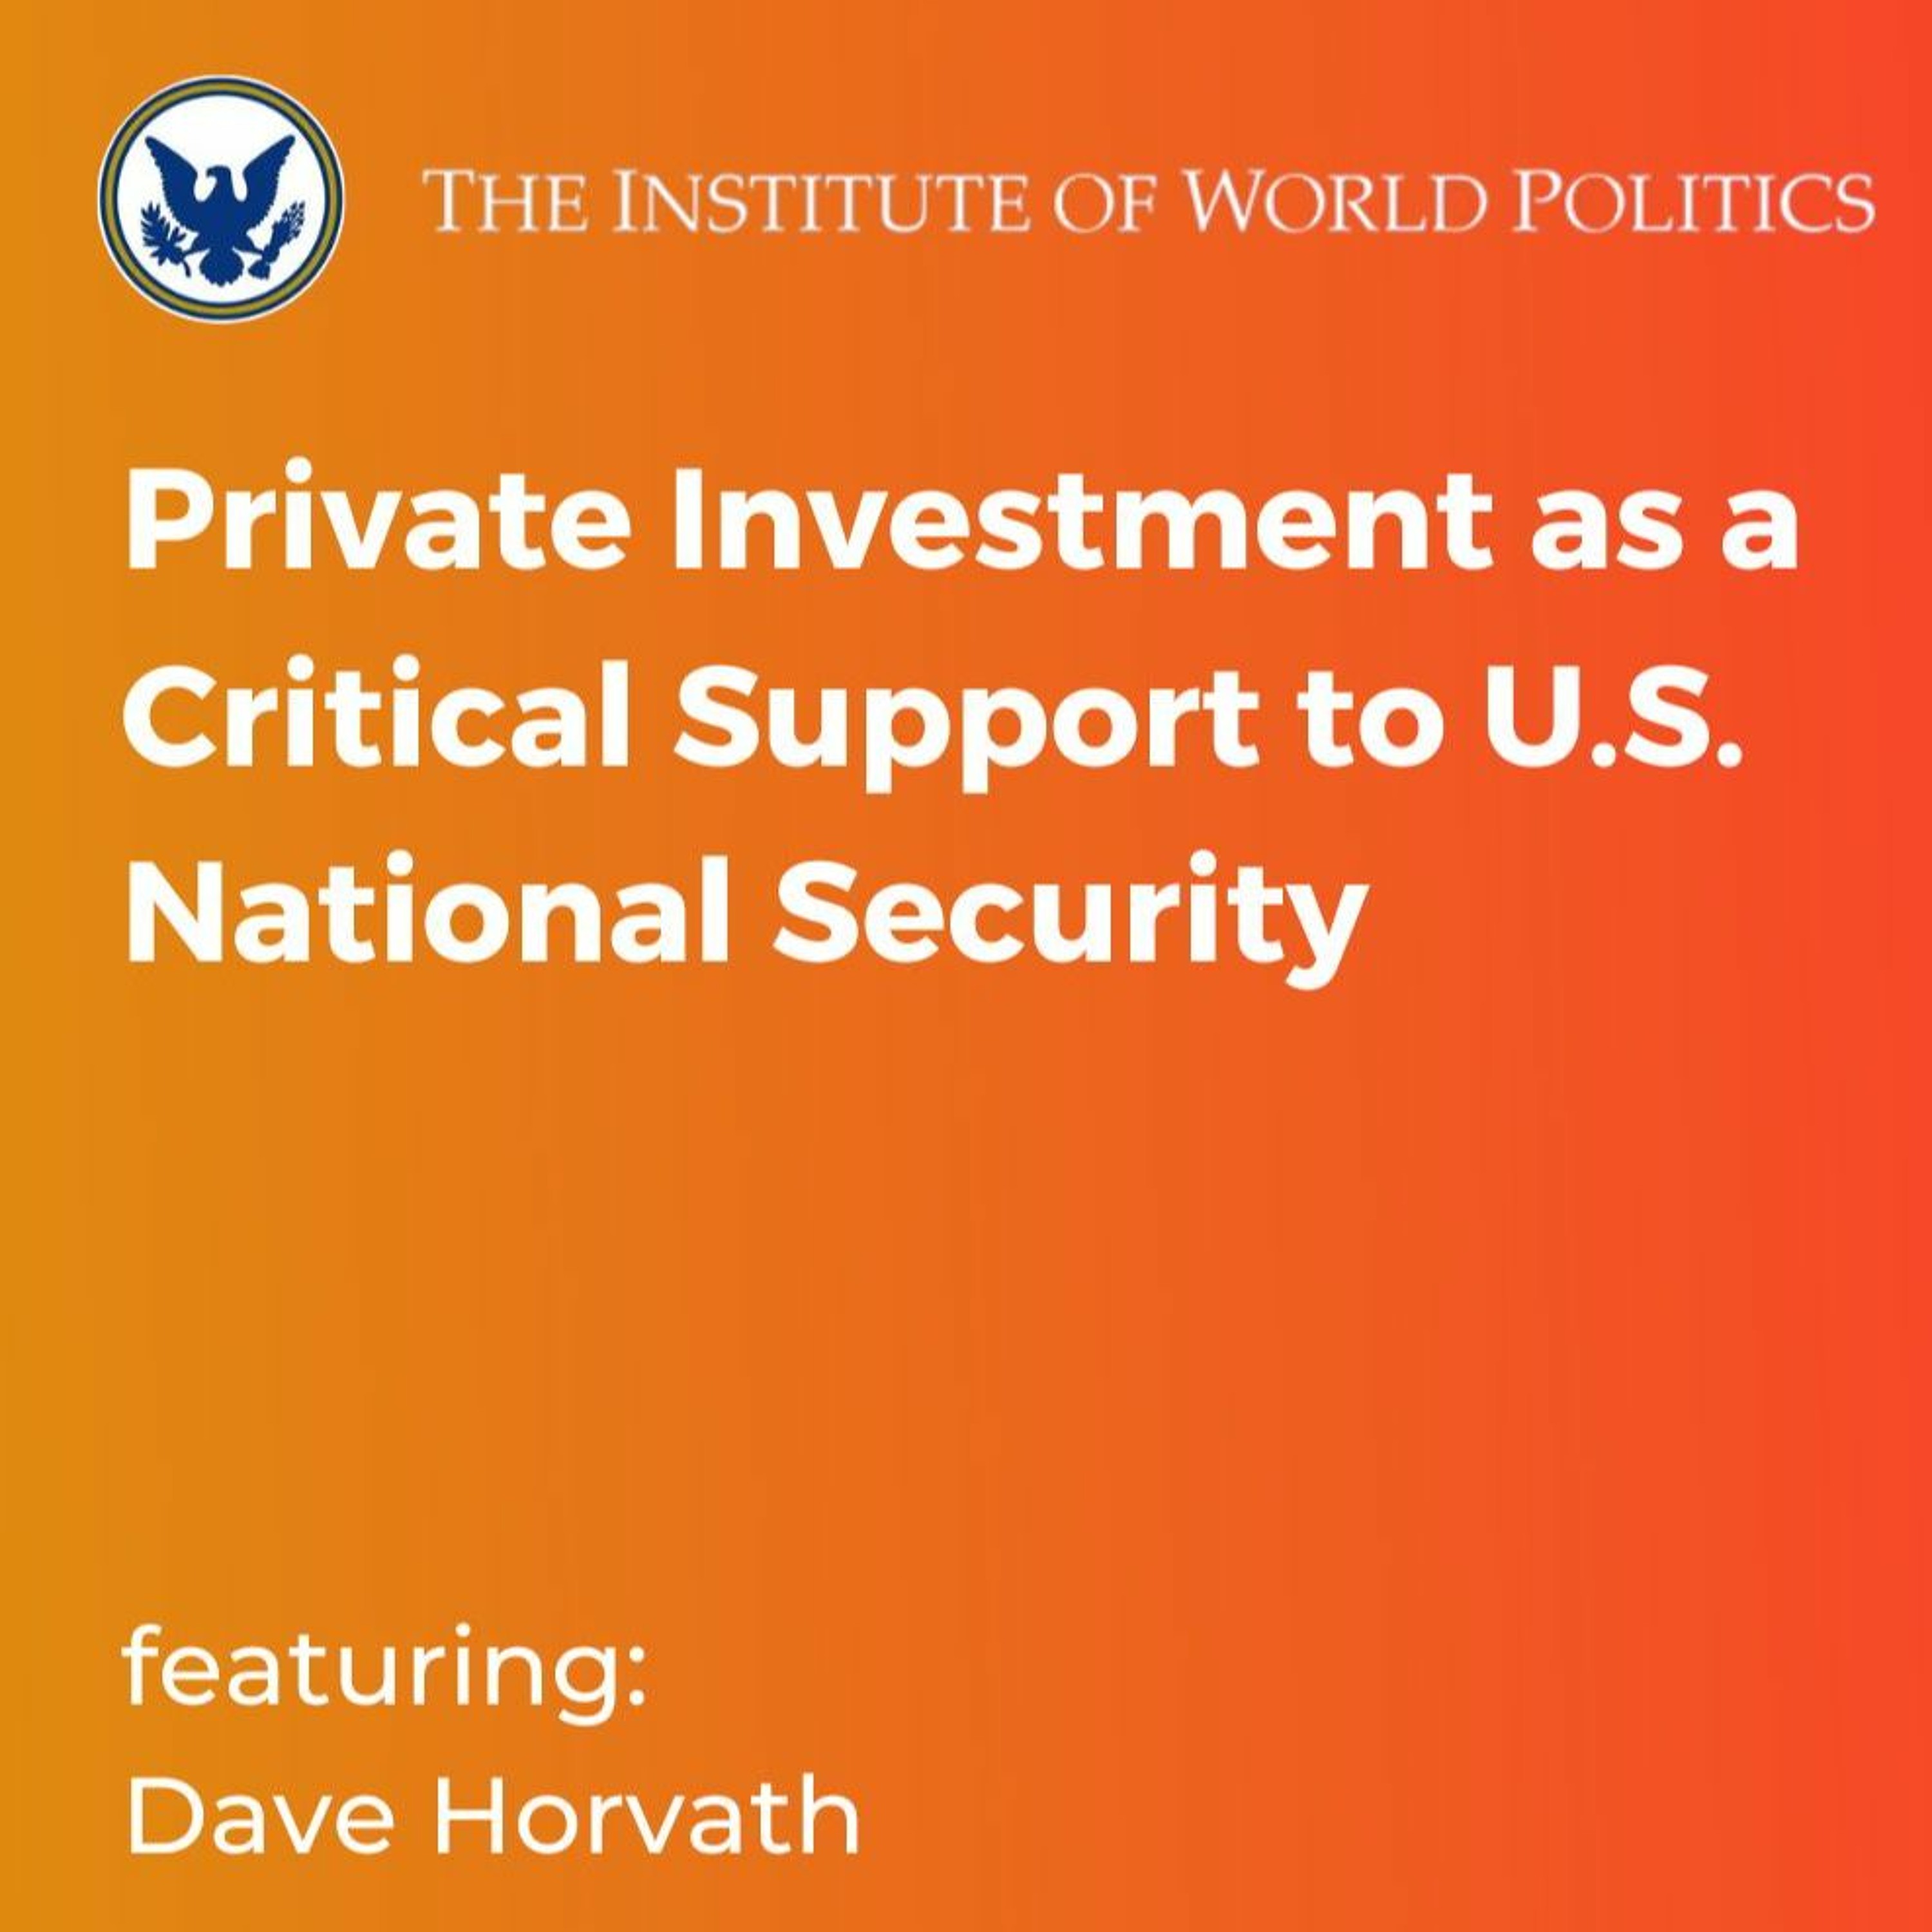 Private Investment as a Critical Support to U.S. National Security